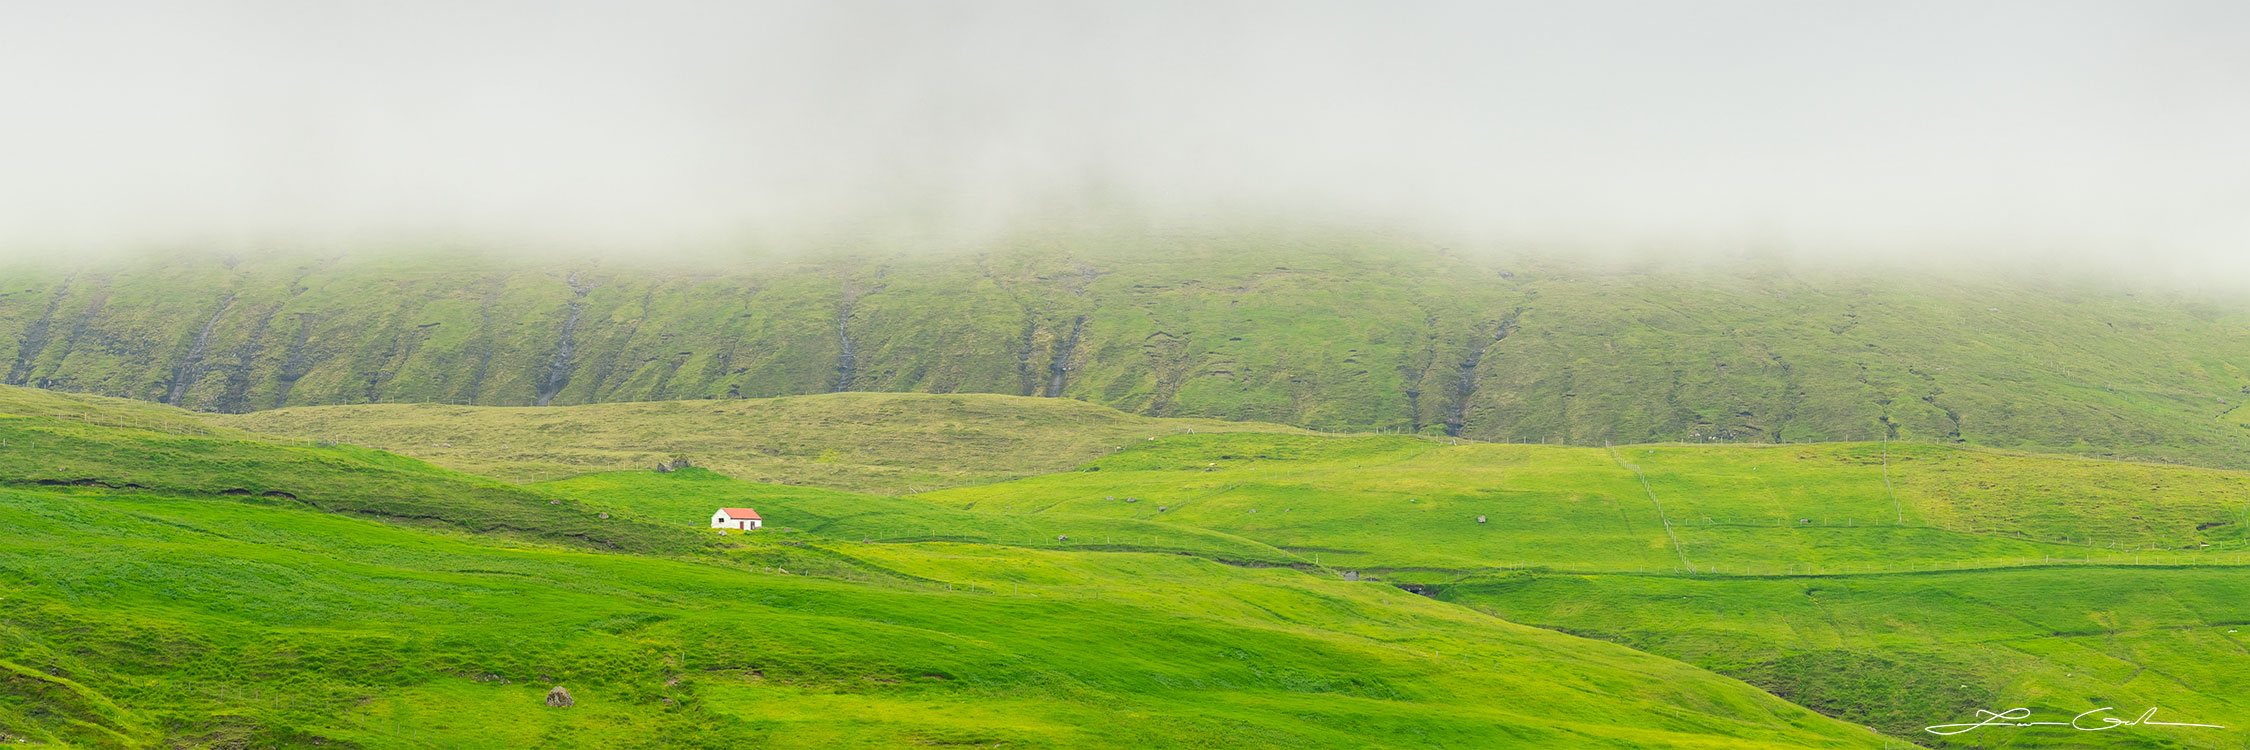 A solitary house on top of a lush green hill and heavy fog above - Faroe Islands - Gintchin Fine Art